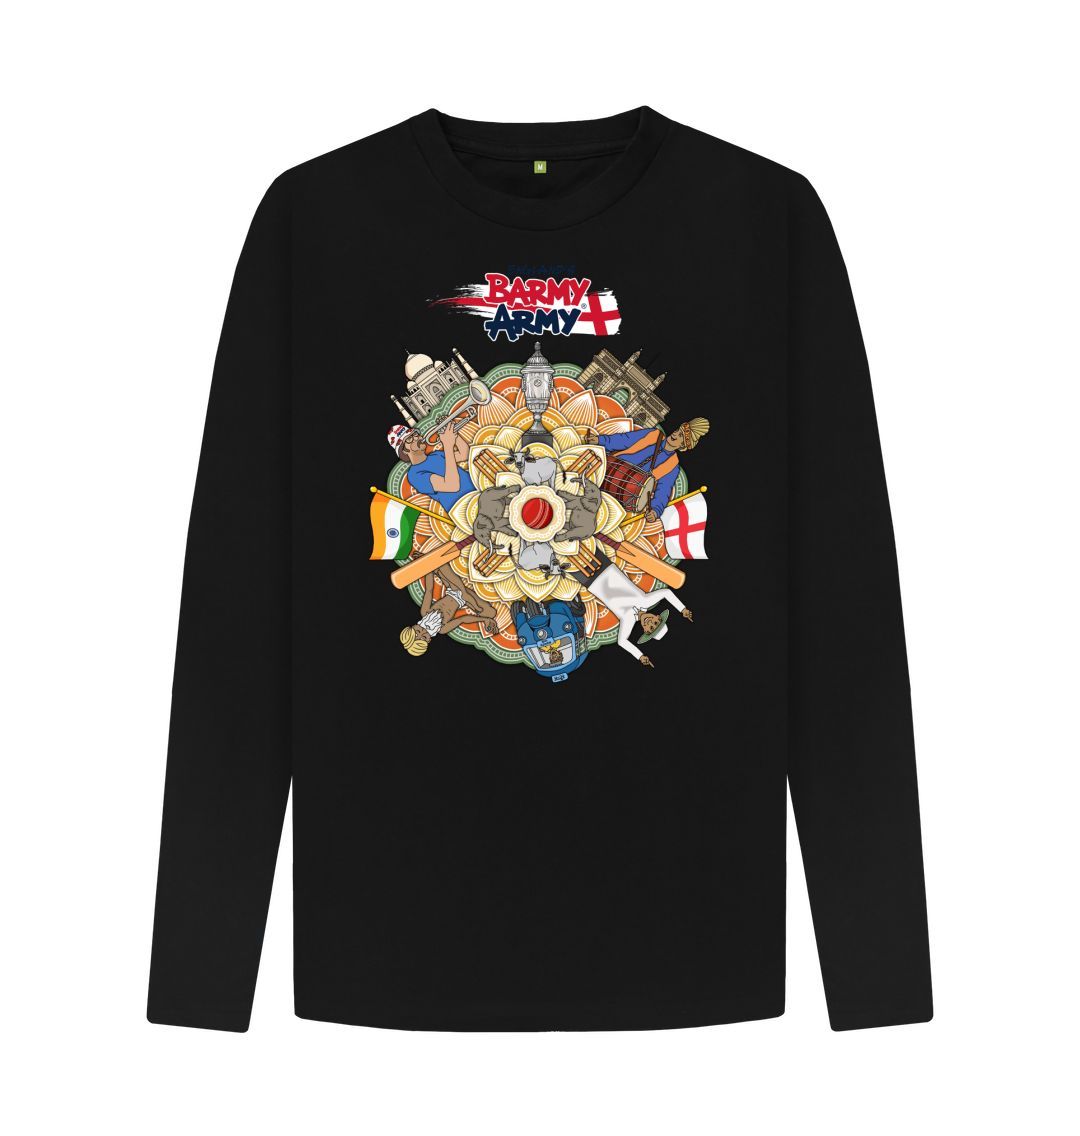 Black Barmy Army India Tour Long Sleeve Tee - Men's